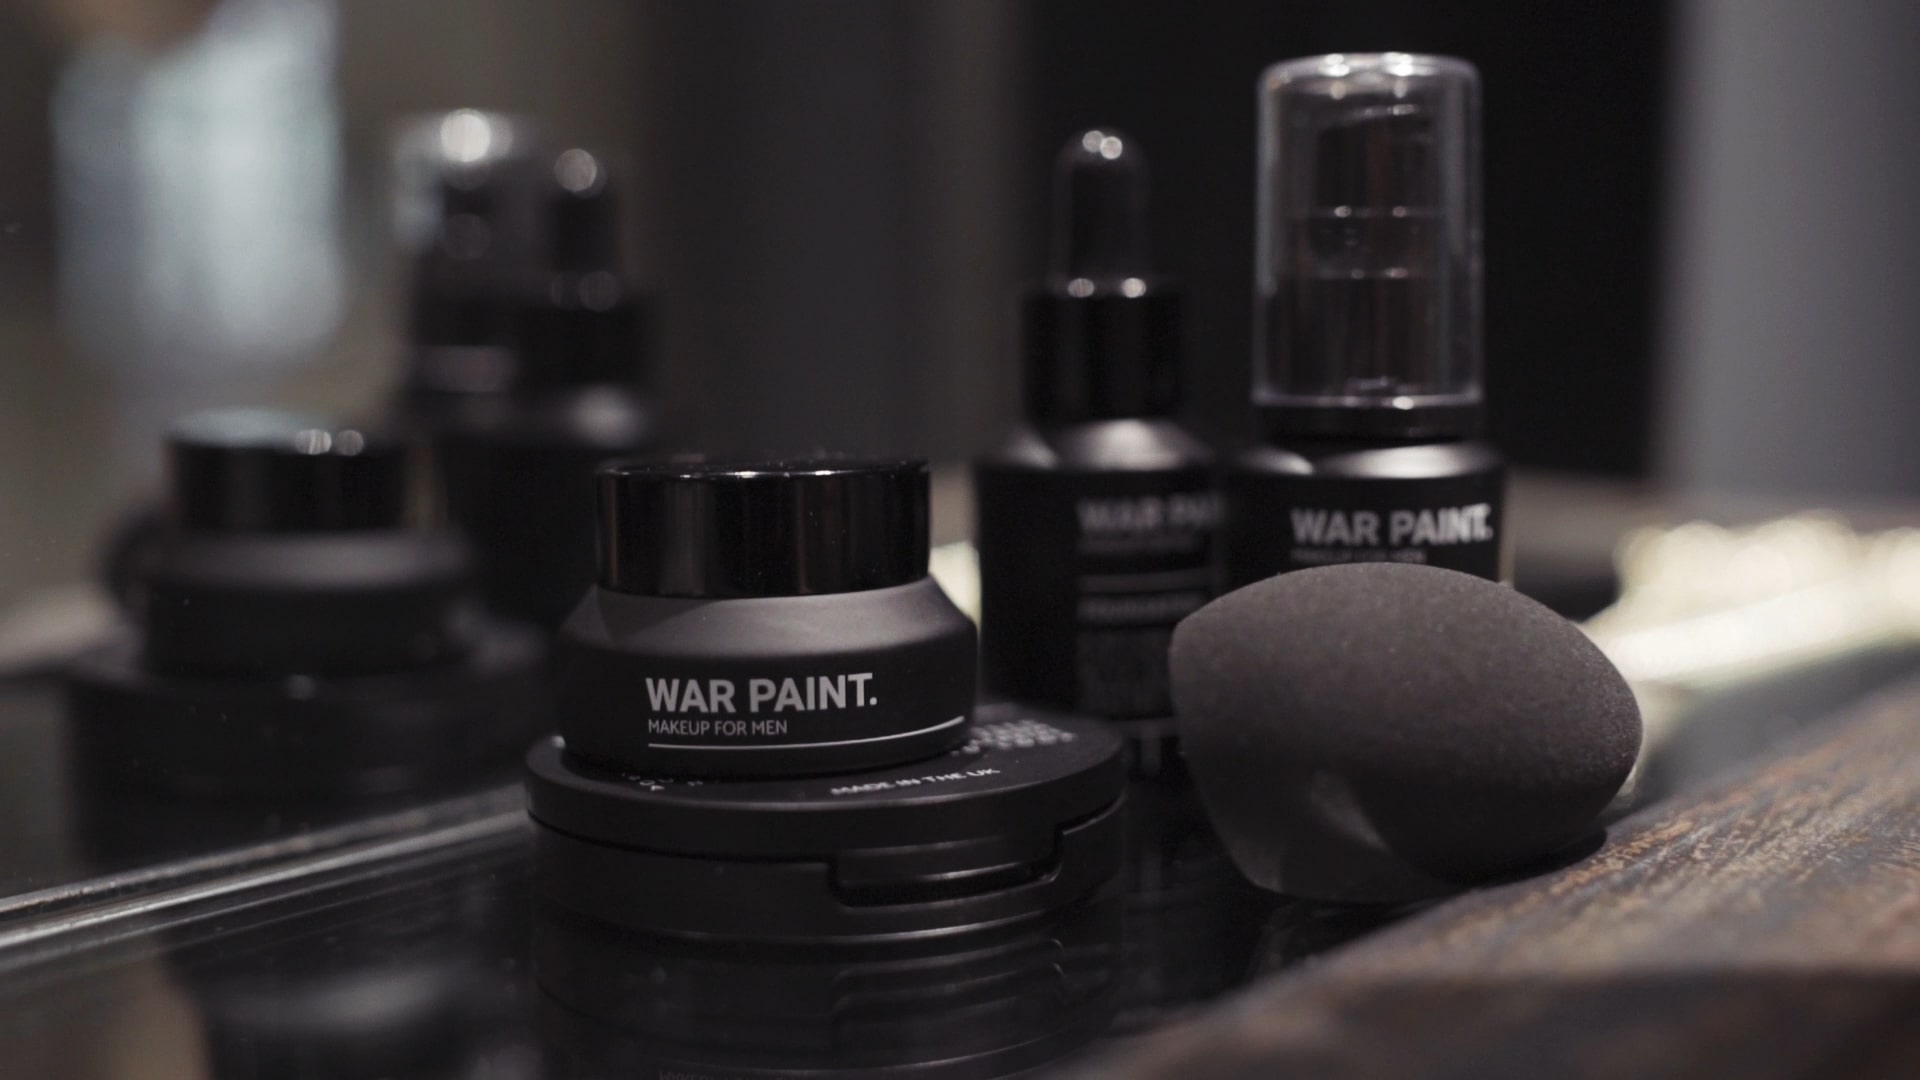 Begivenhed Undvigende sigte Male beauty brand War Paint wants to overhaul stigma and mainstream make-up  for men